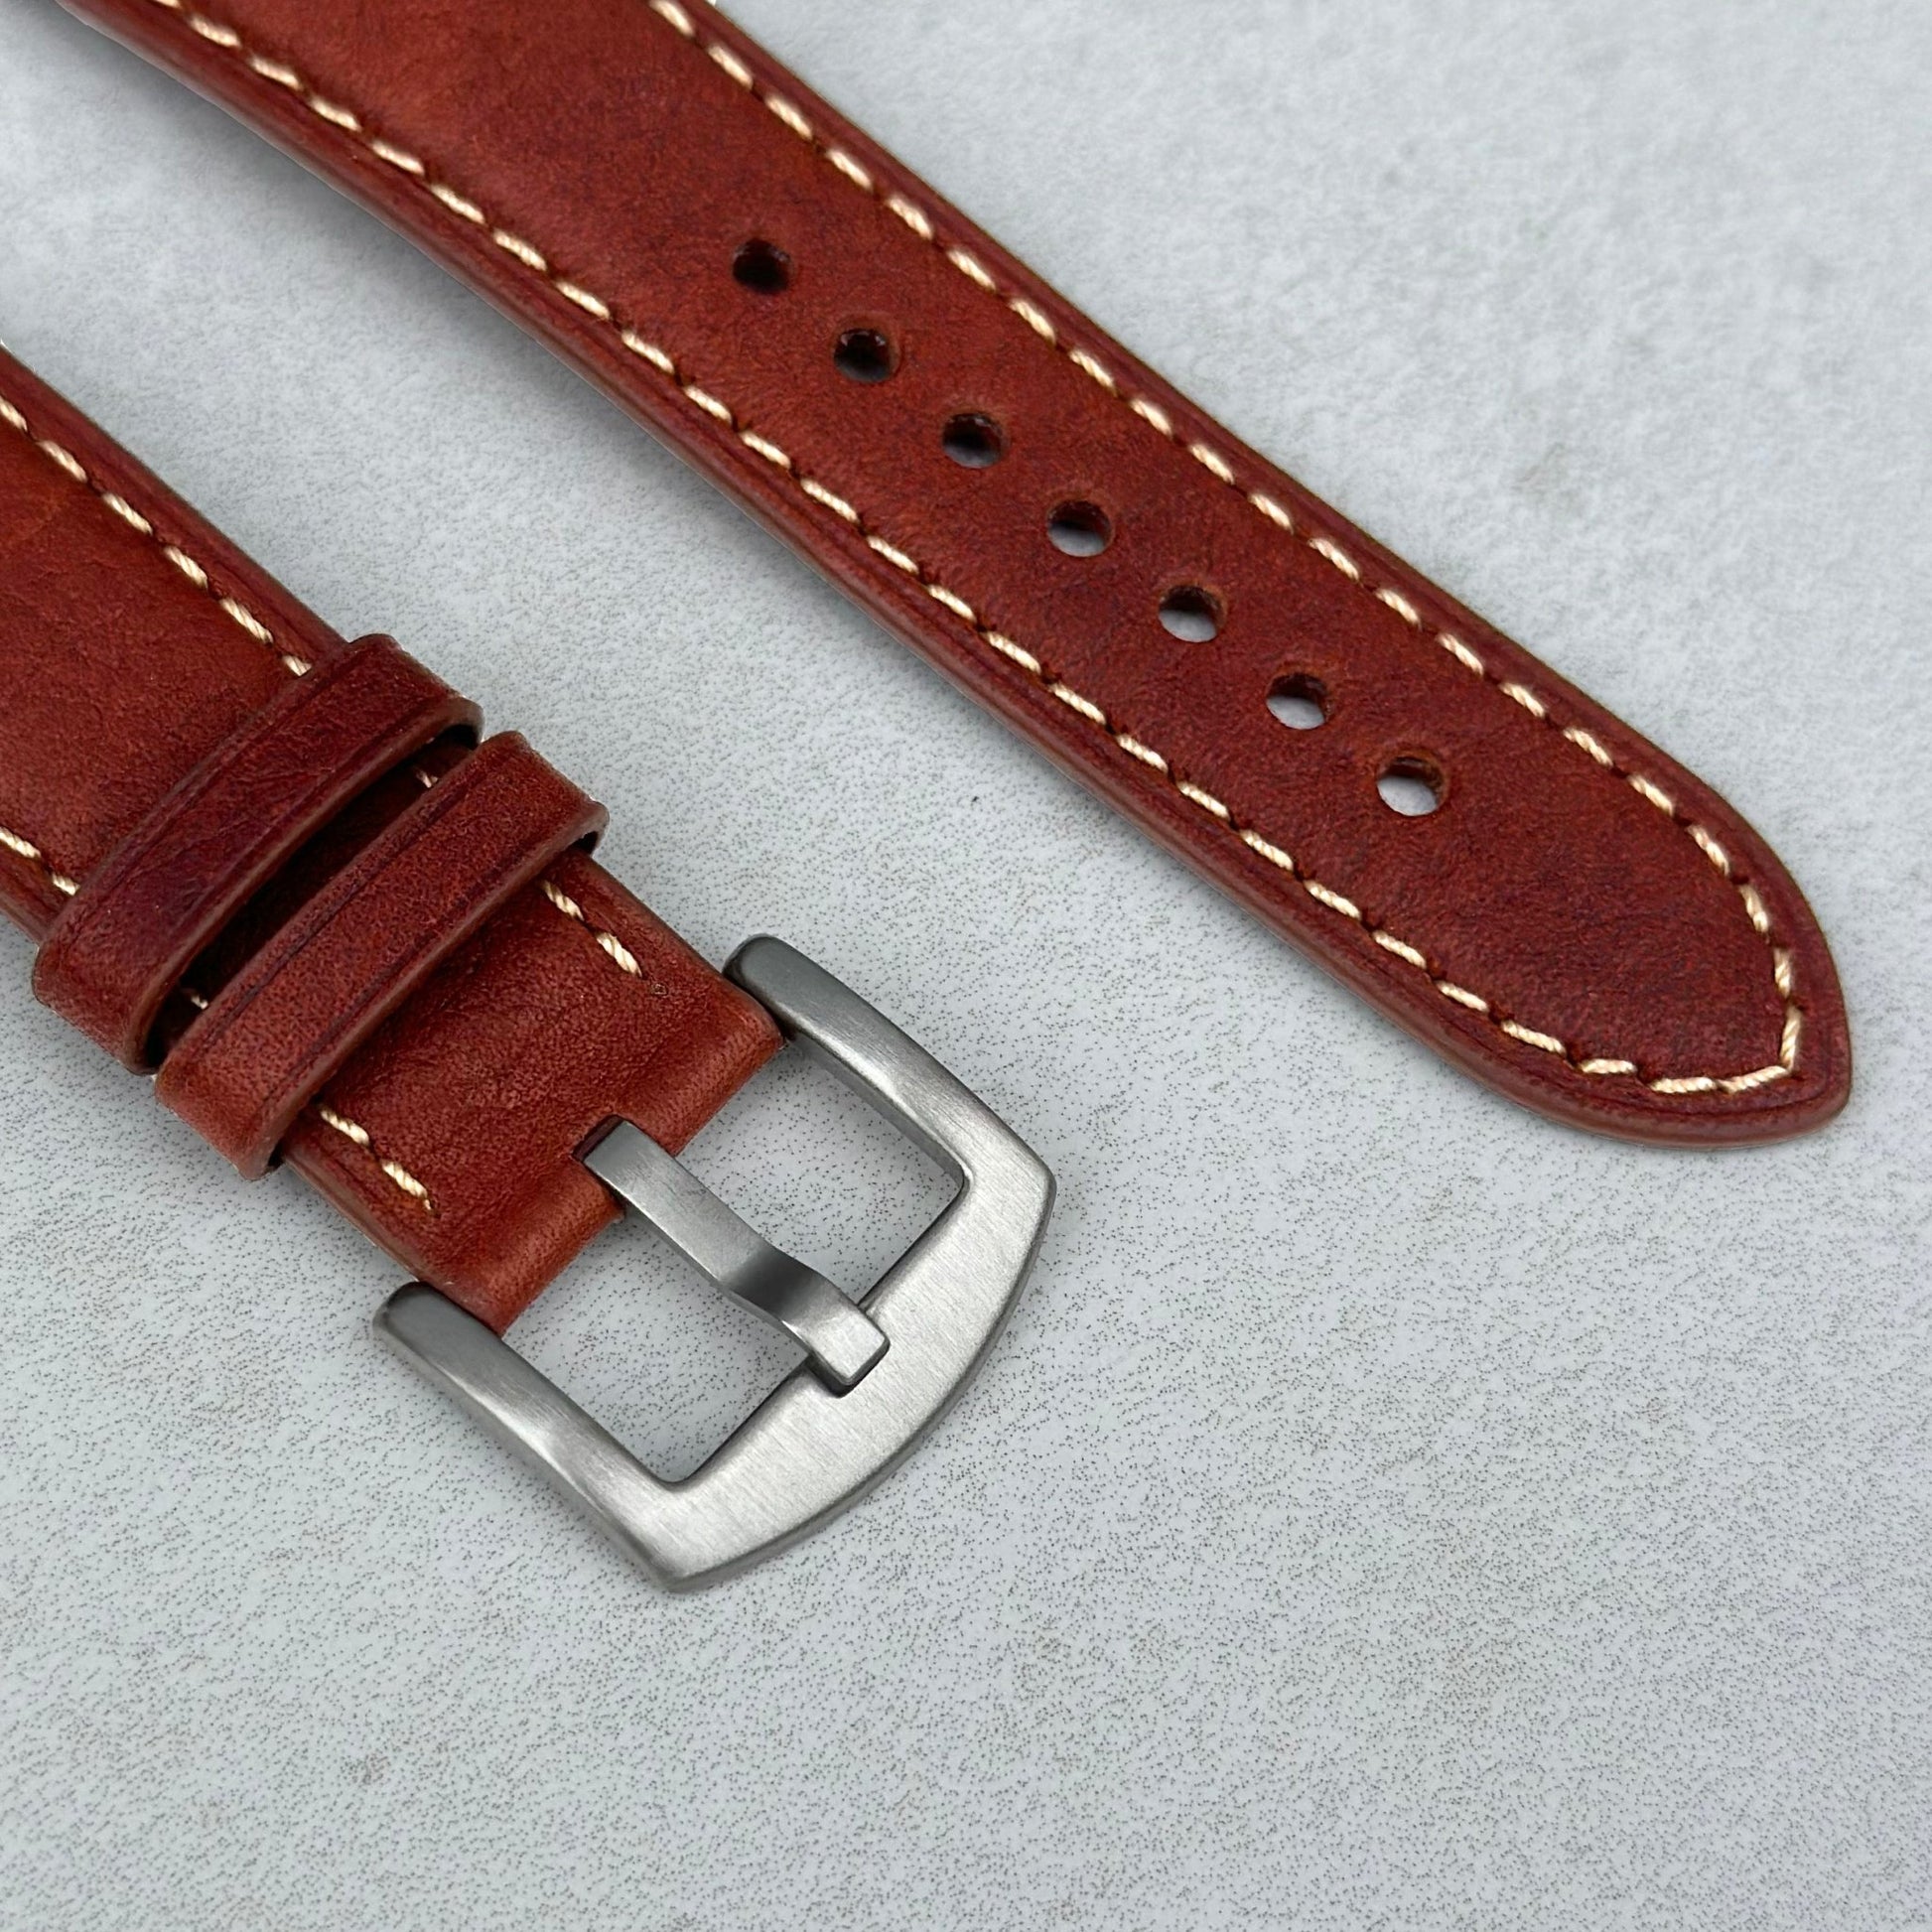 Brushed 316L stainless steel buckle on the terracotta brown Italian leather watch strap. Contrast ivory stitching.